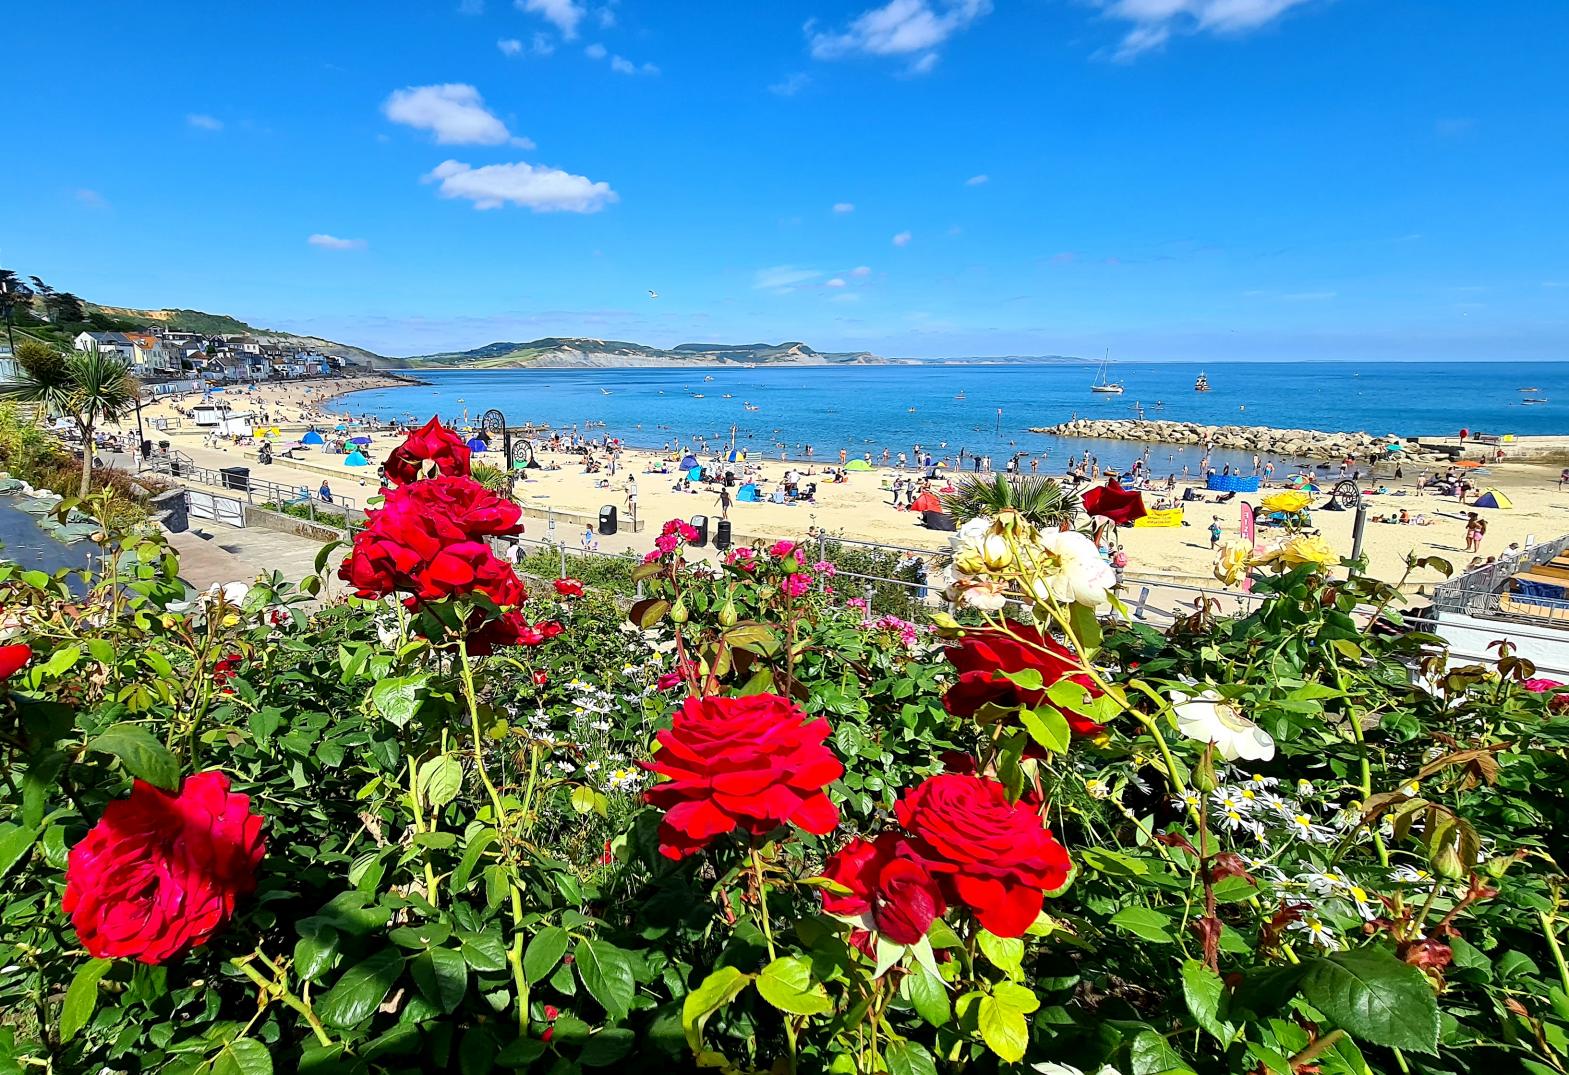 A blooming view - red roses and the stunning Jurassic coastline